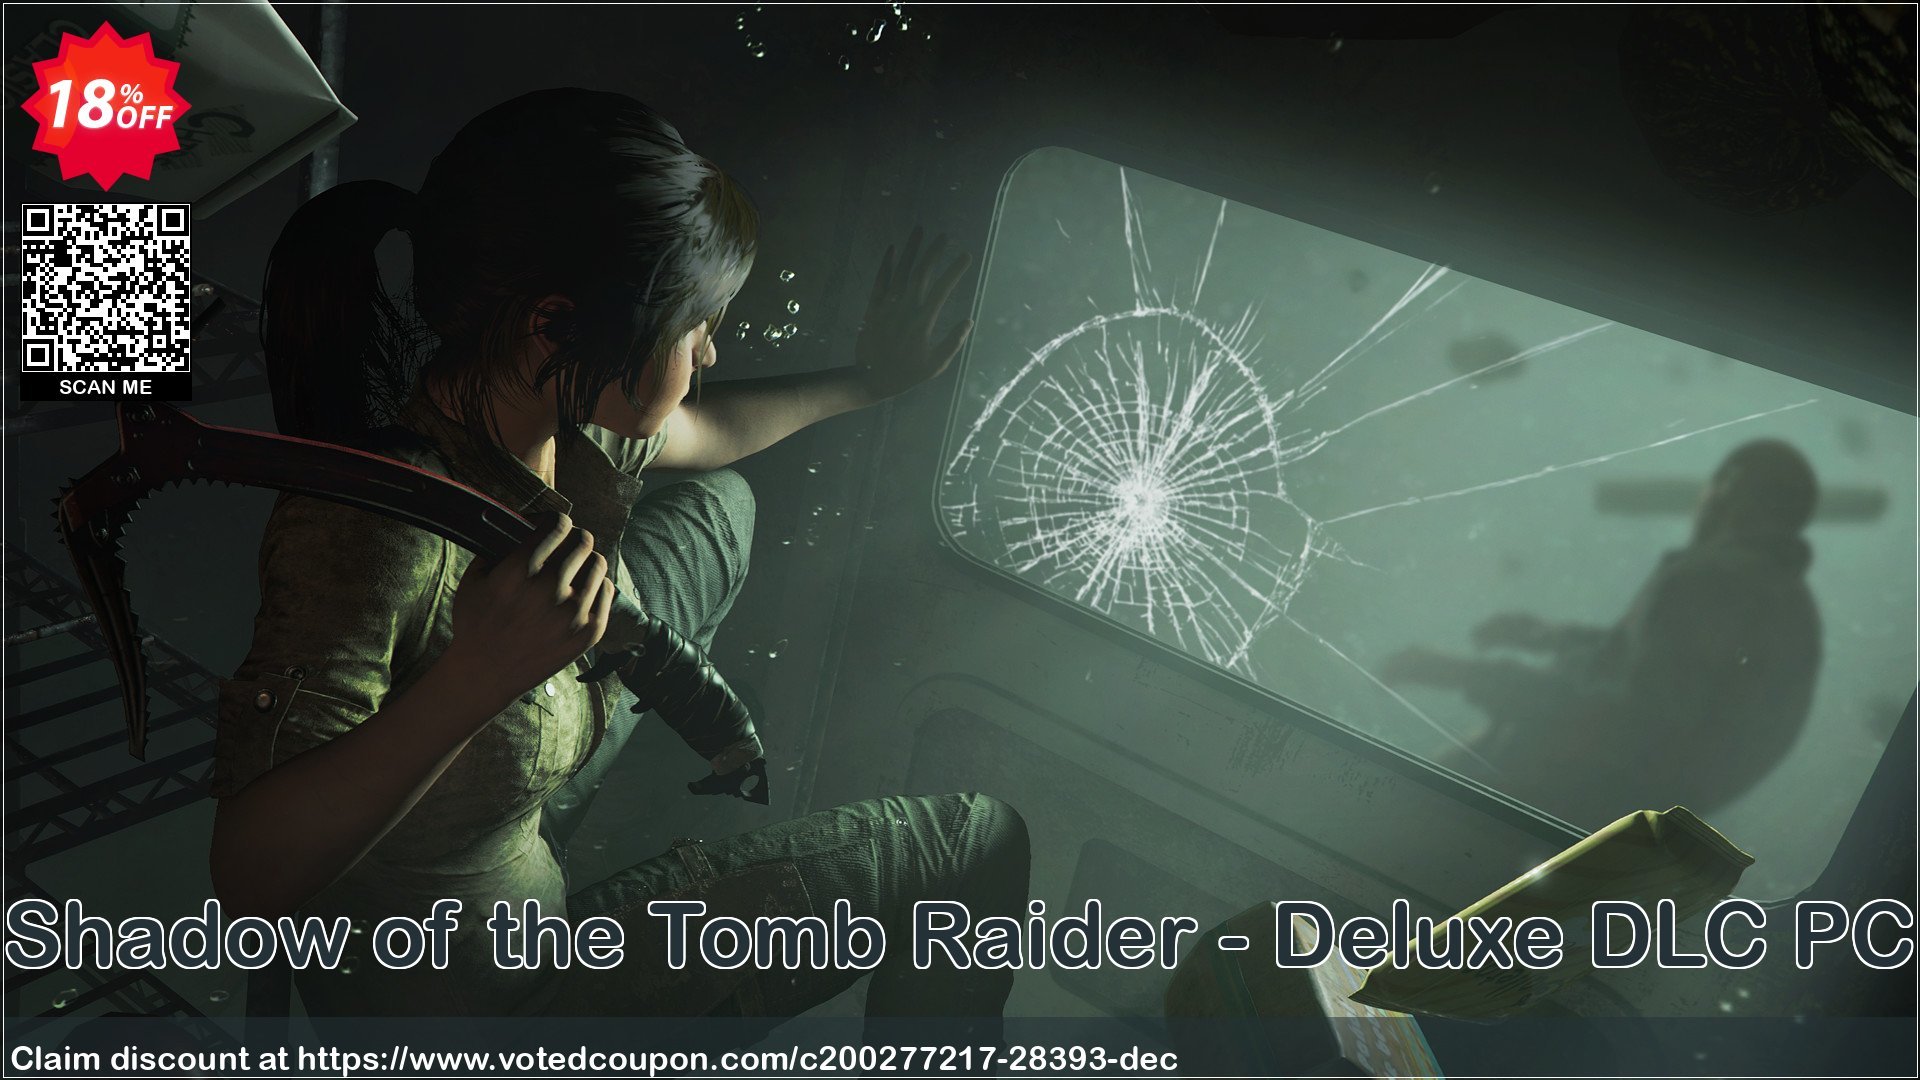 Shadow of the Tomb Raider - Deluxe DLC PC Coupon Code Apr 2024, 18% OFF - VotedCoupon